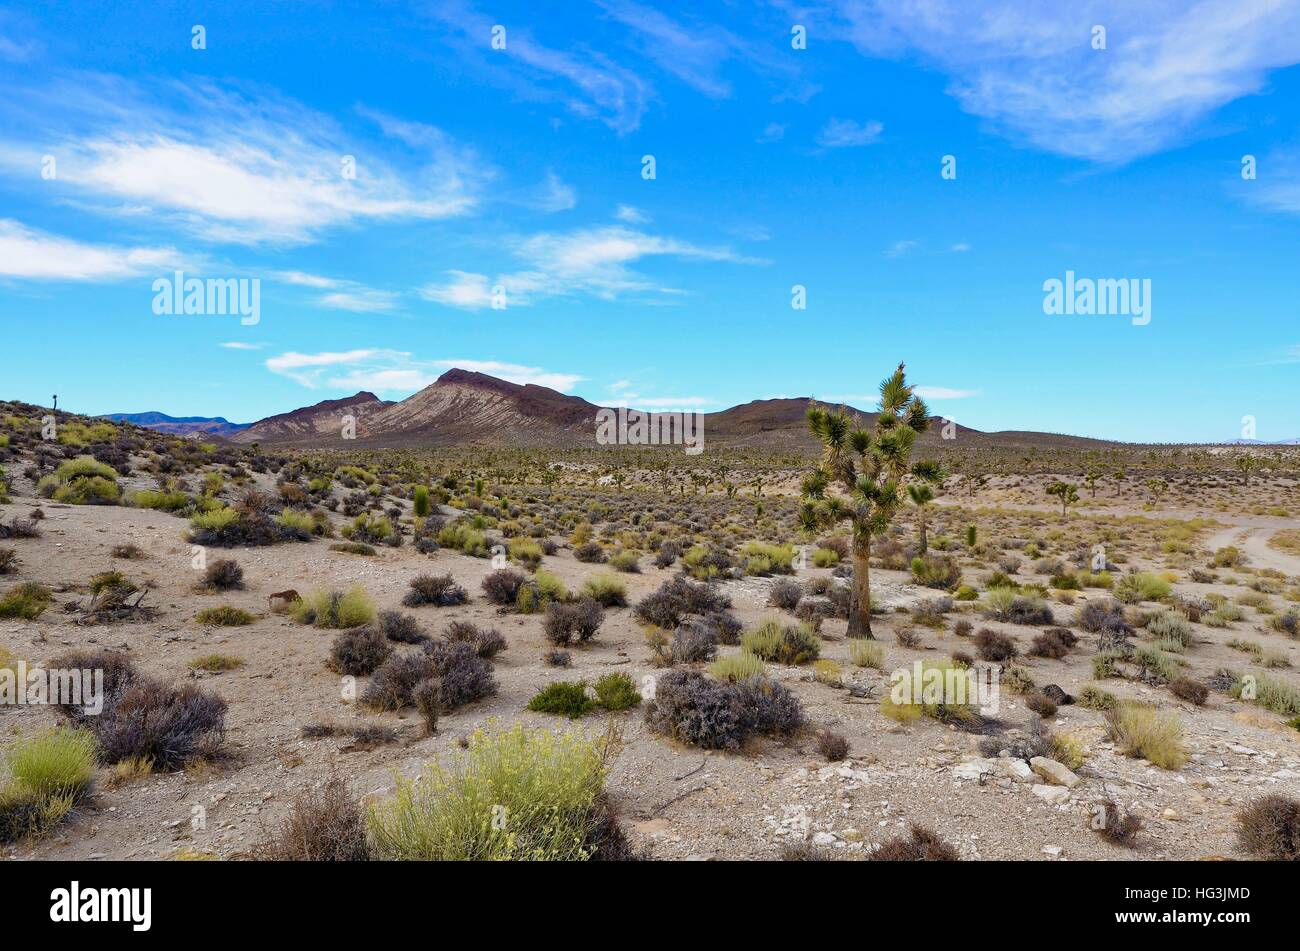 Visa of desert shrubbery with a lone Joshua Tree and mountains in the background Stock Photo